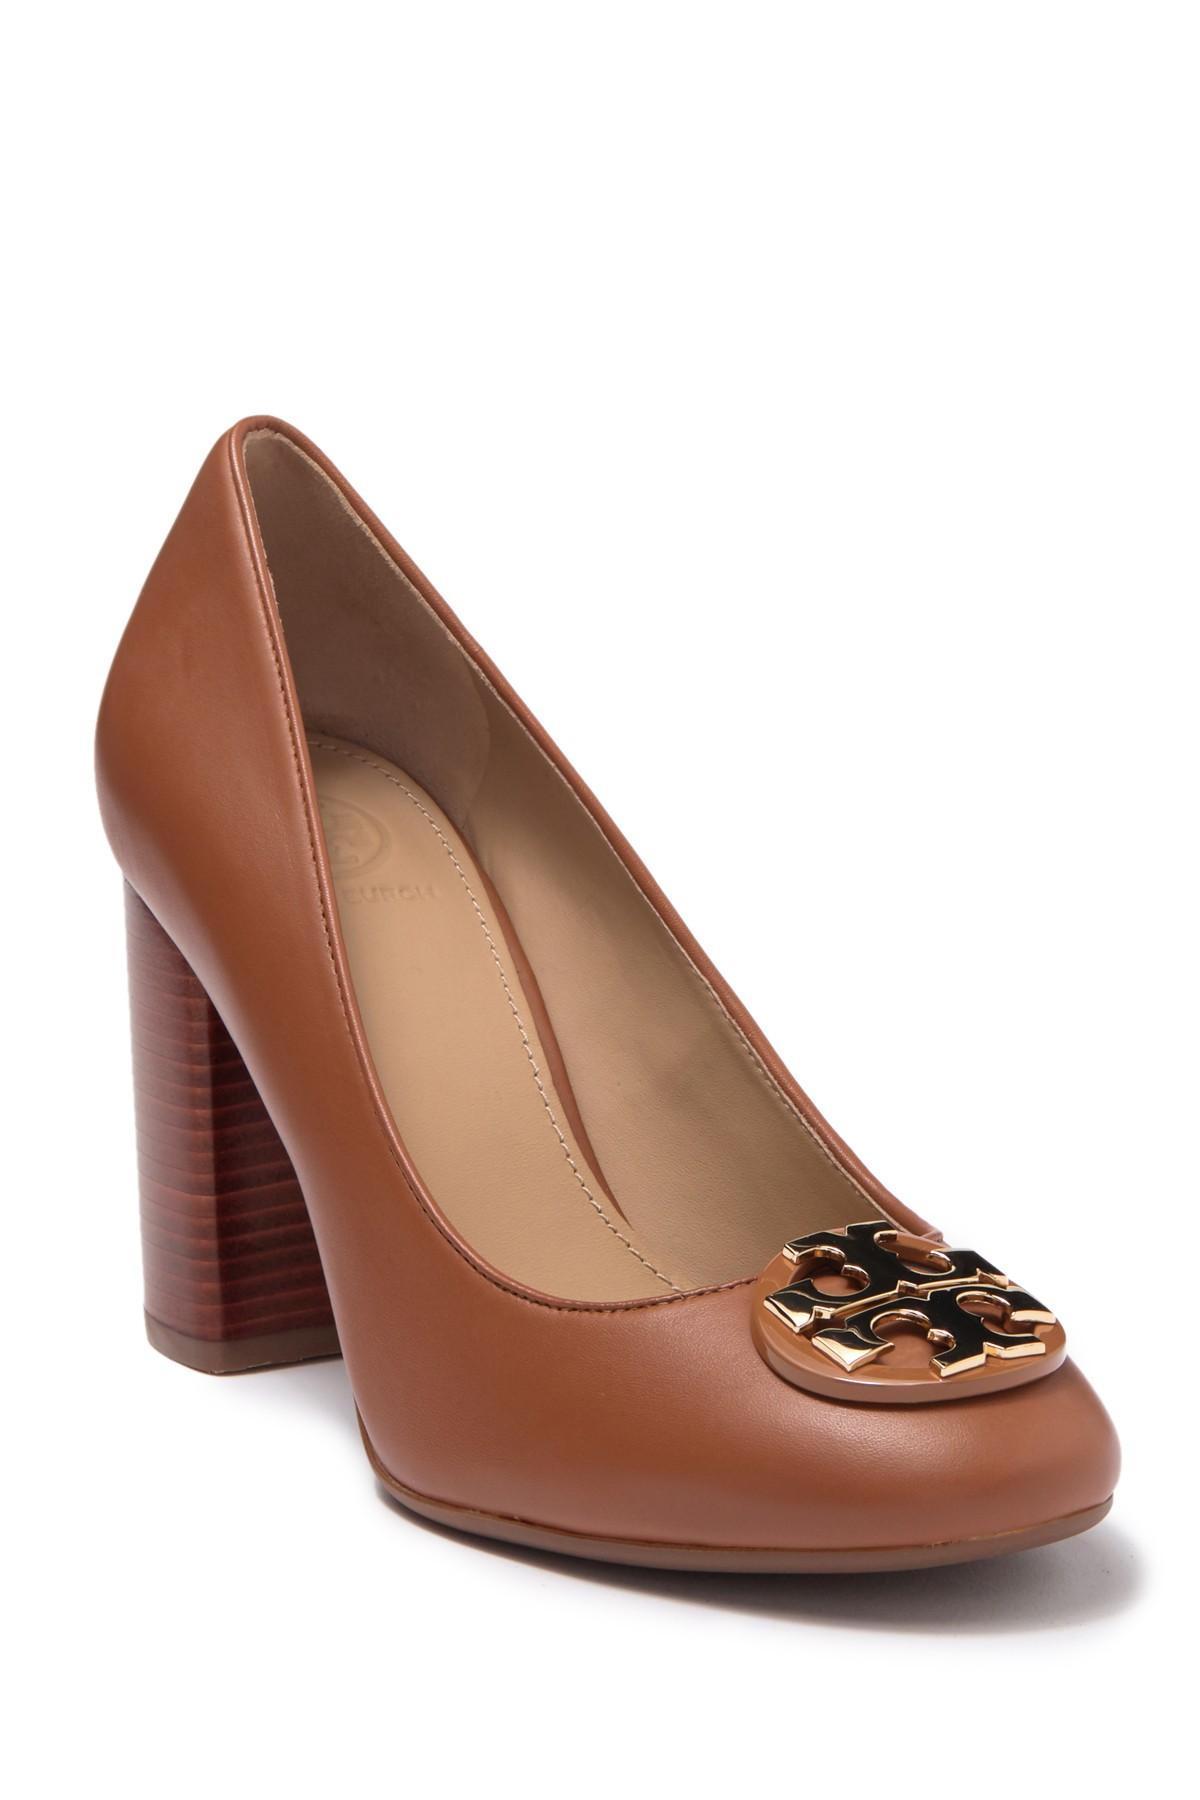 Tory Burch Janey Leather Pump in Brown | Lyst